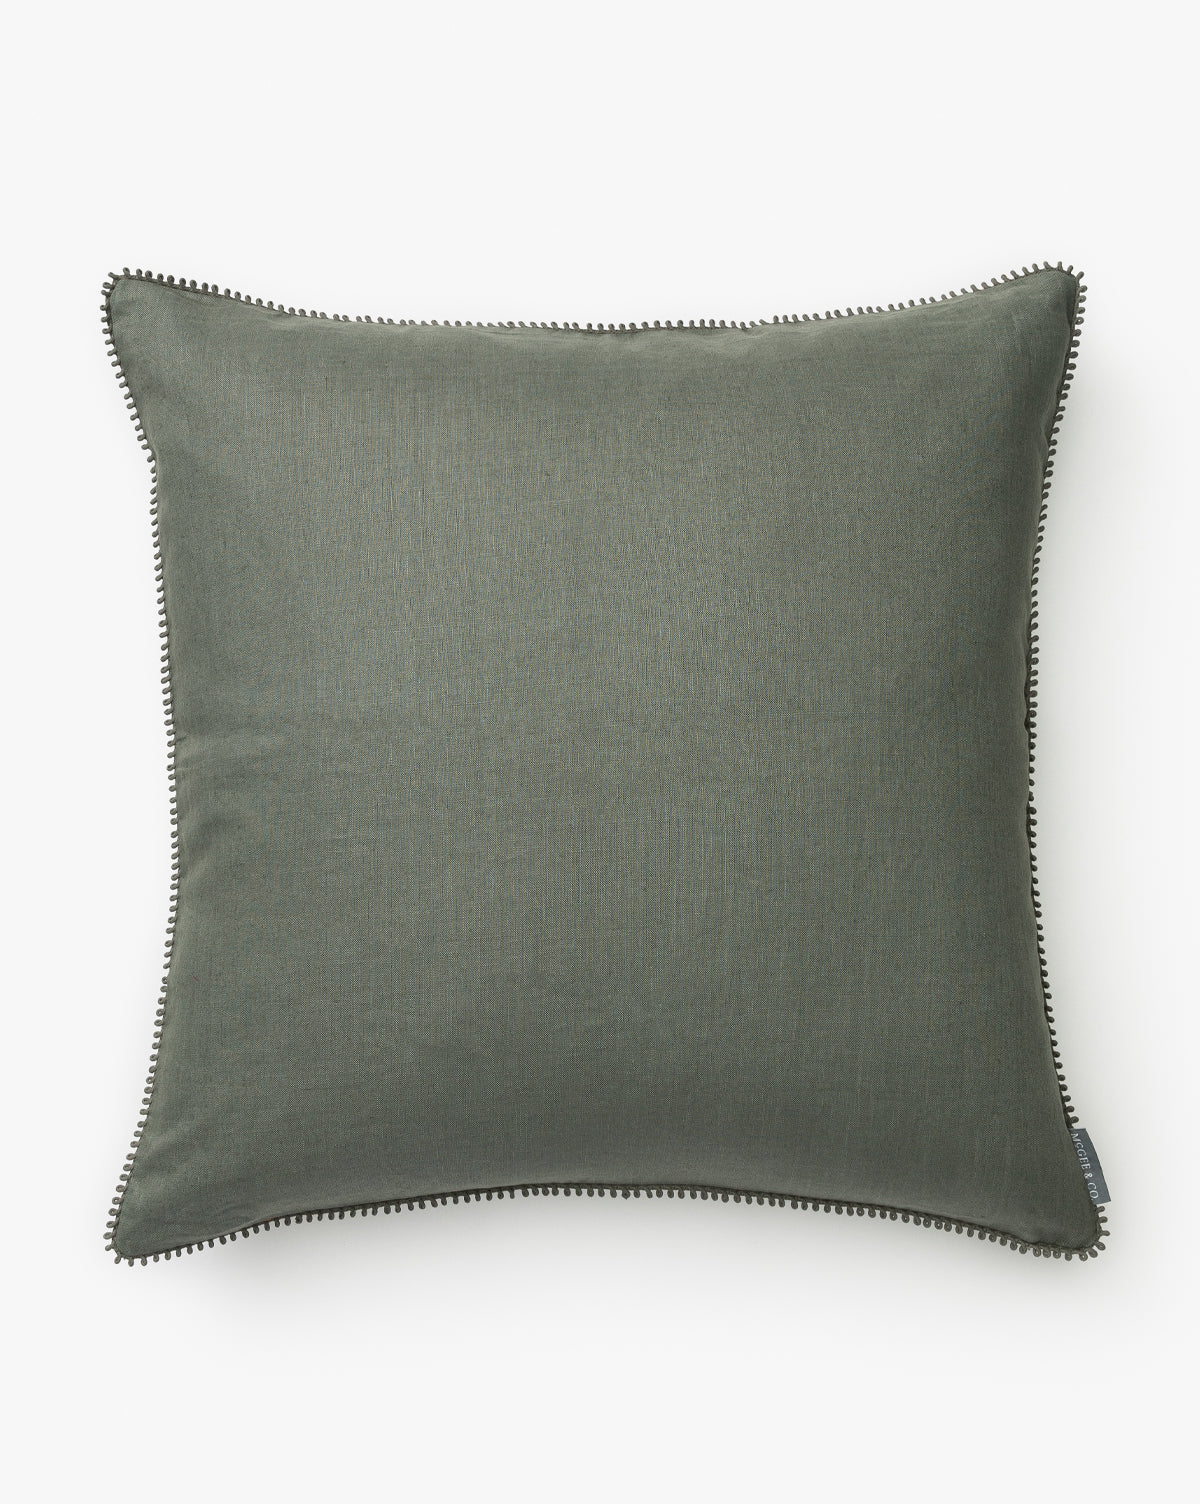 Monsoon Impex, Pennywood Pillow Cover